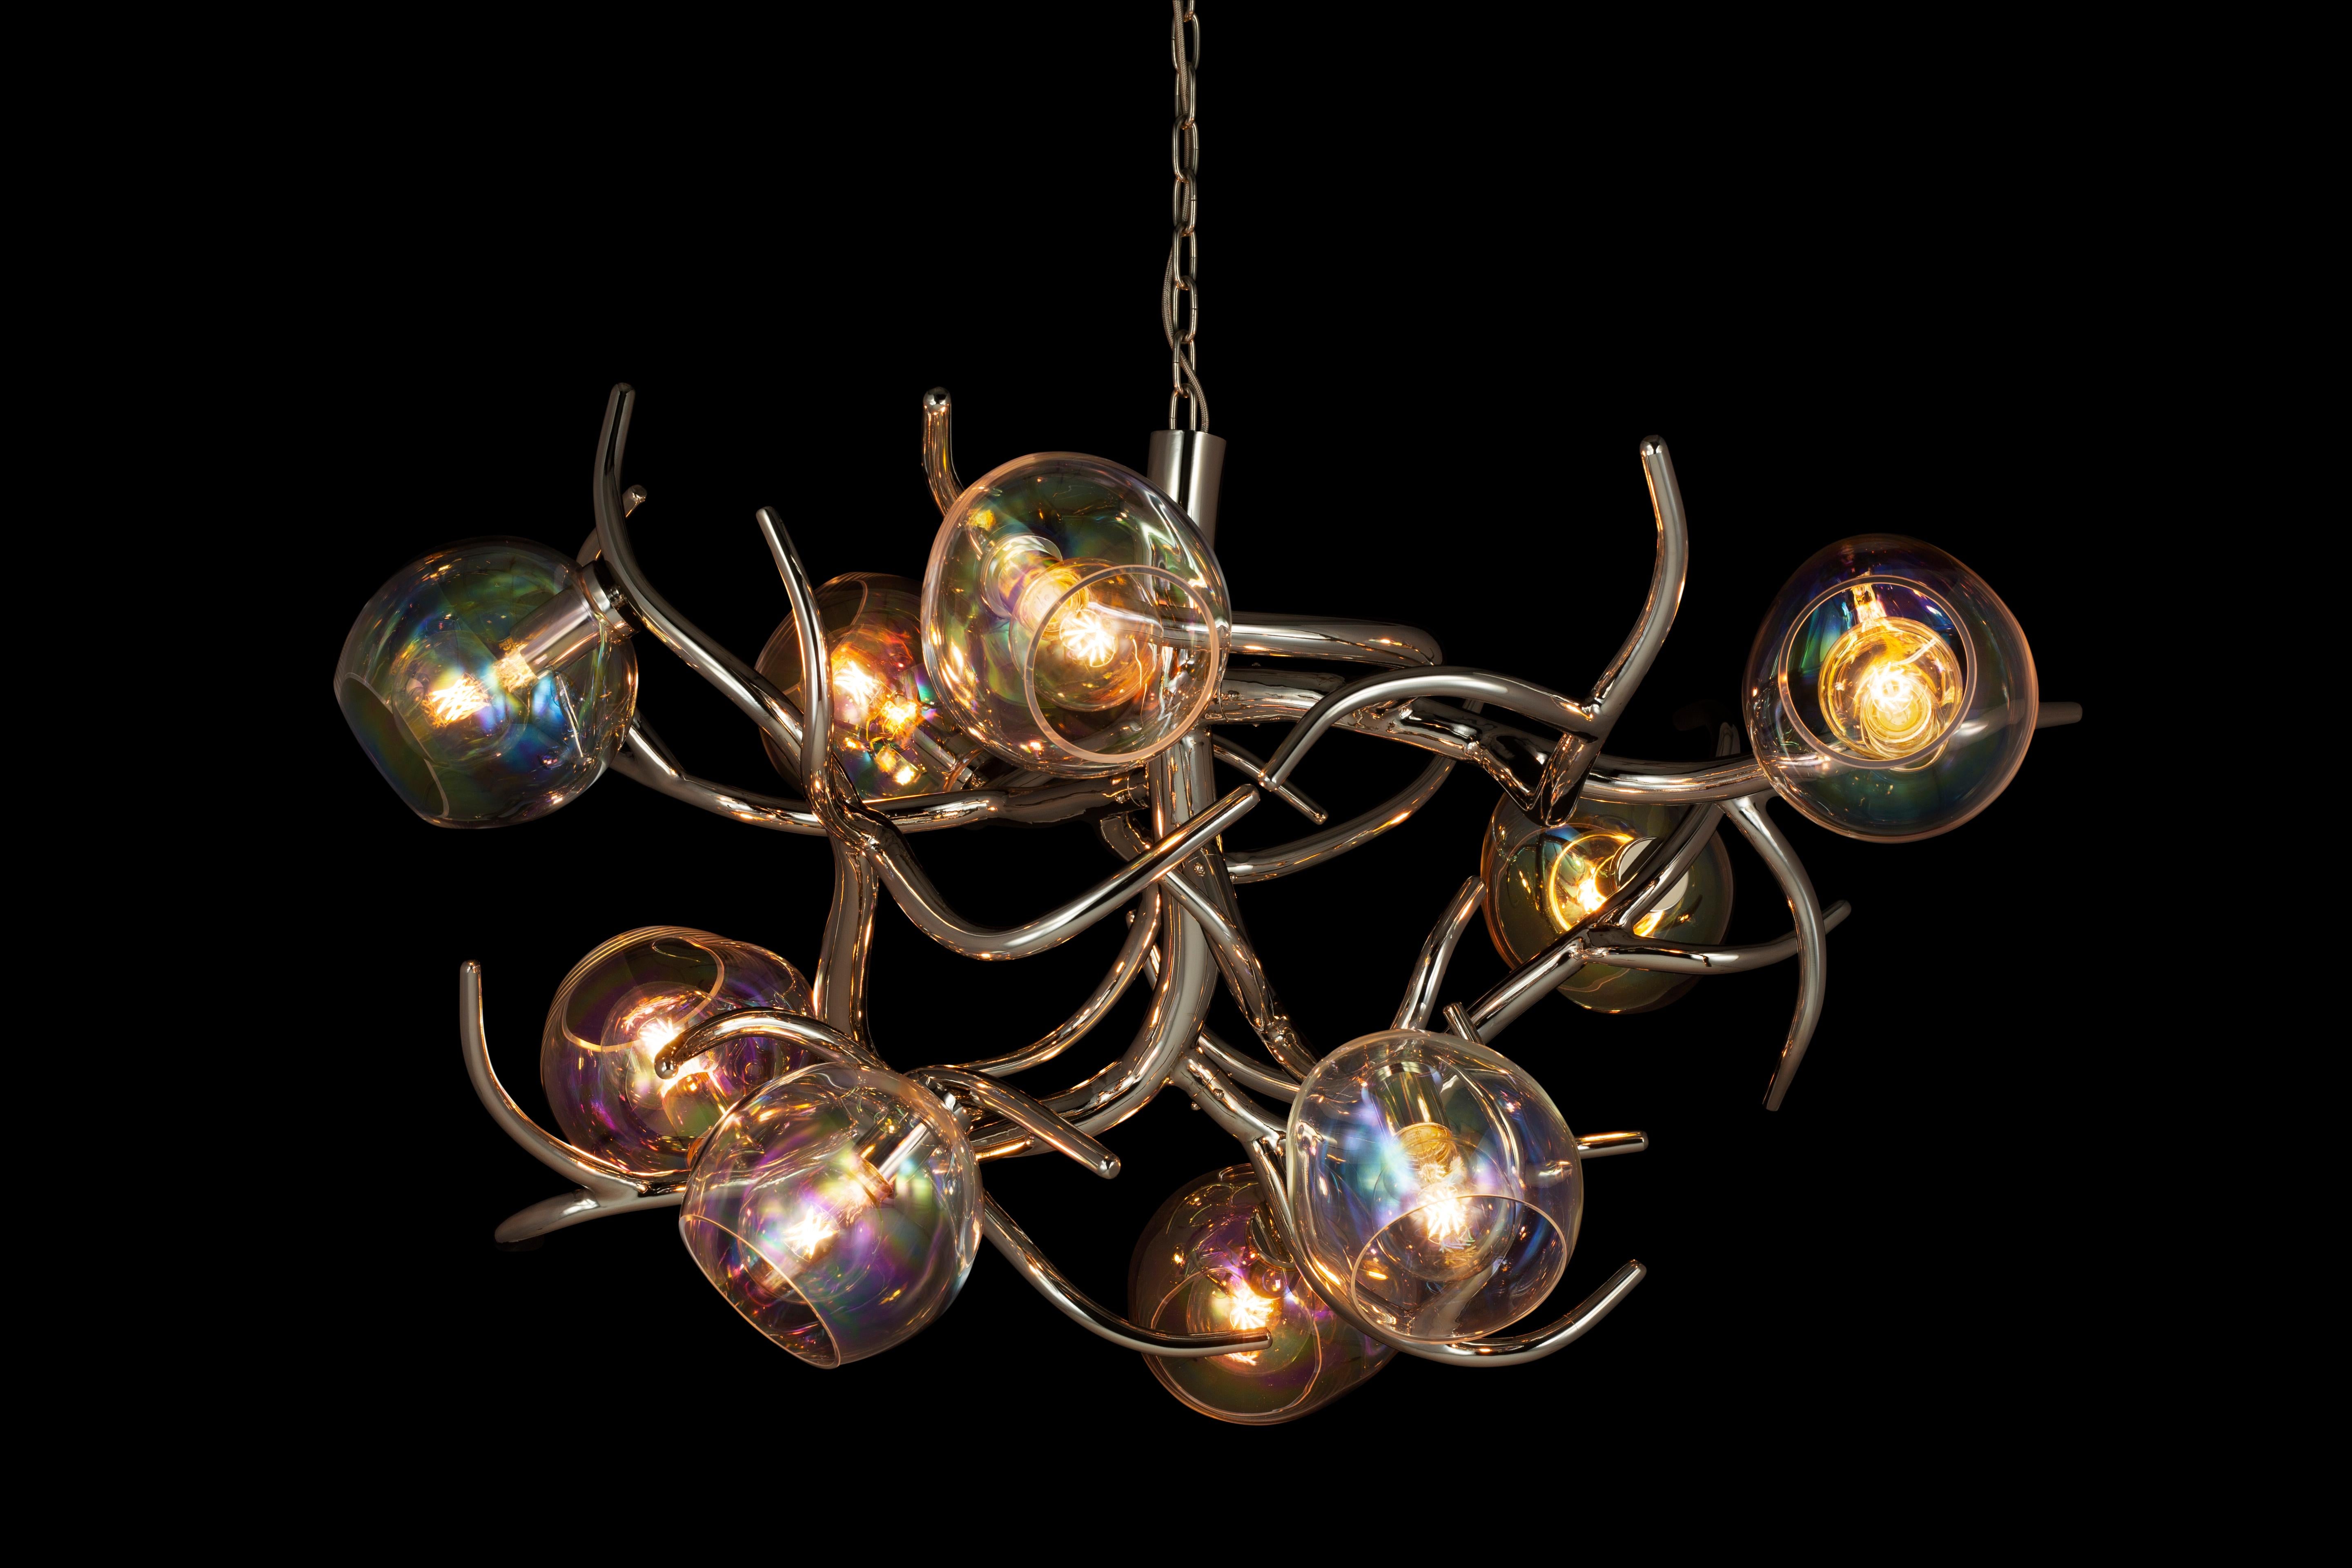 The Ersa, a modern chandelier in a nickel finish with iridescent glass spheres, is designed by William Brand, founder of Brand van Egmond. Created as the statement chandelier in the interior, this Ersa is available in three different models round,